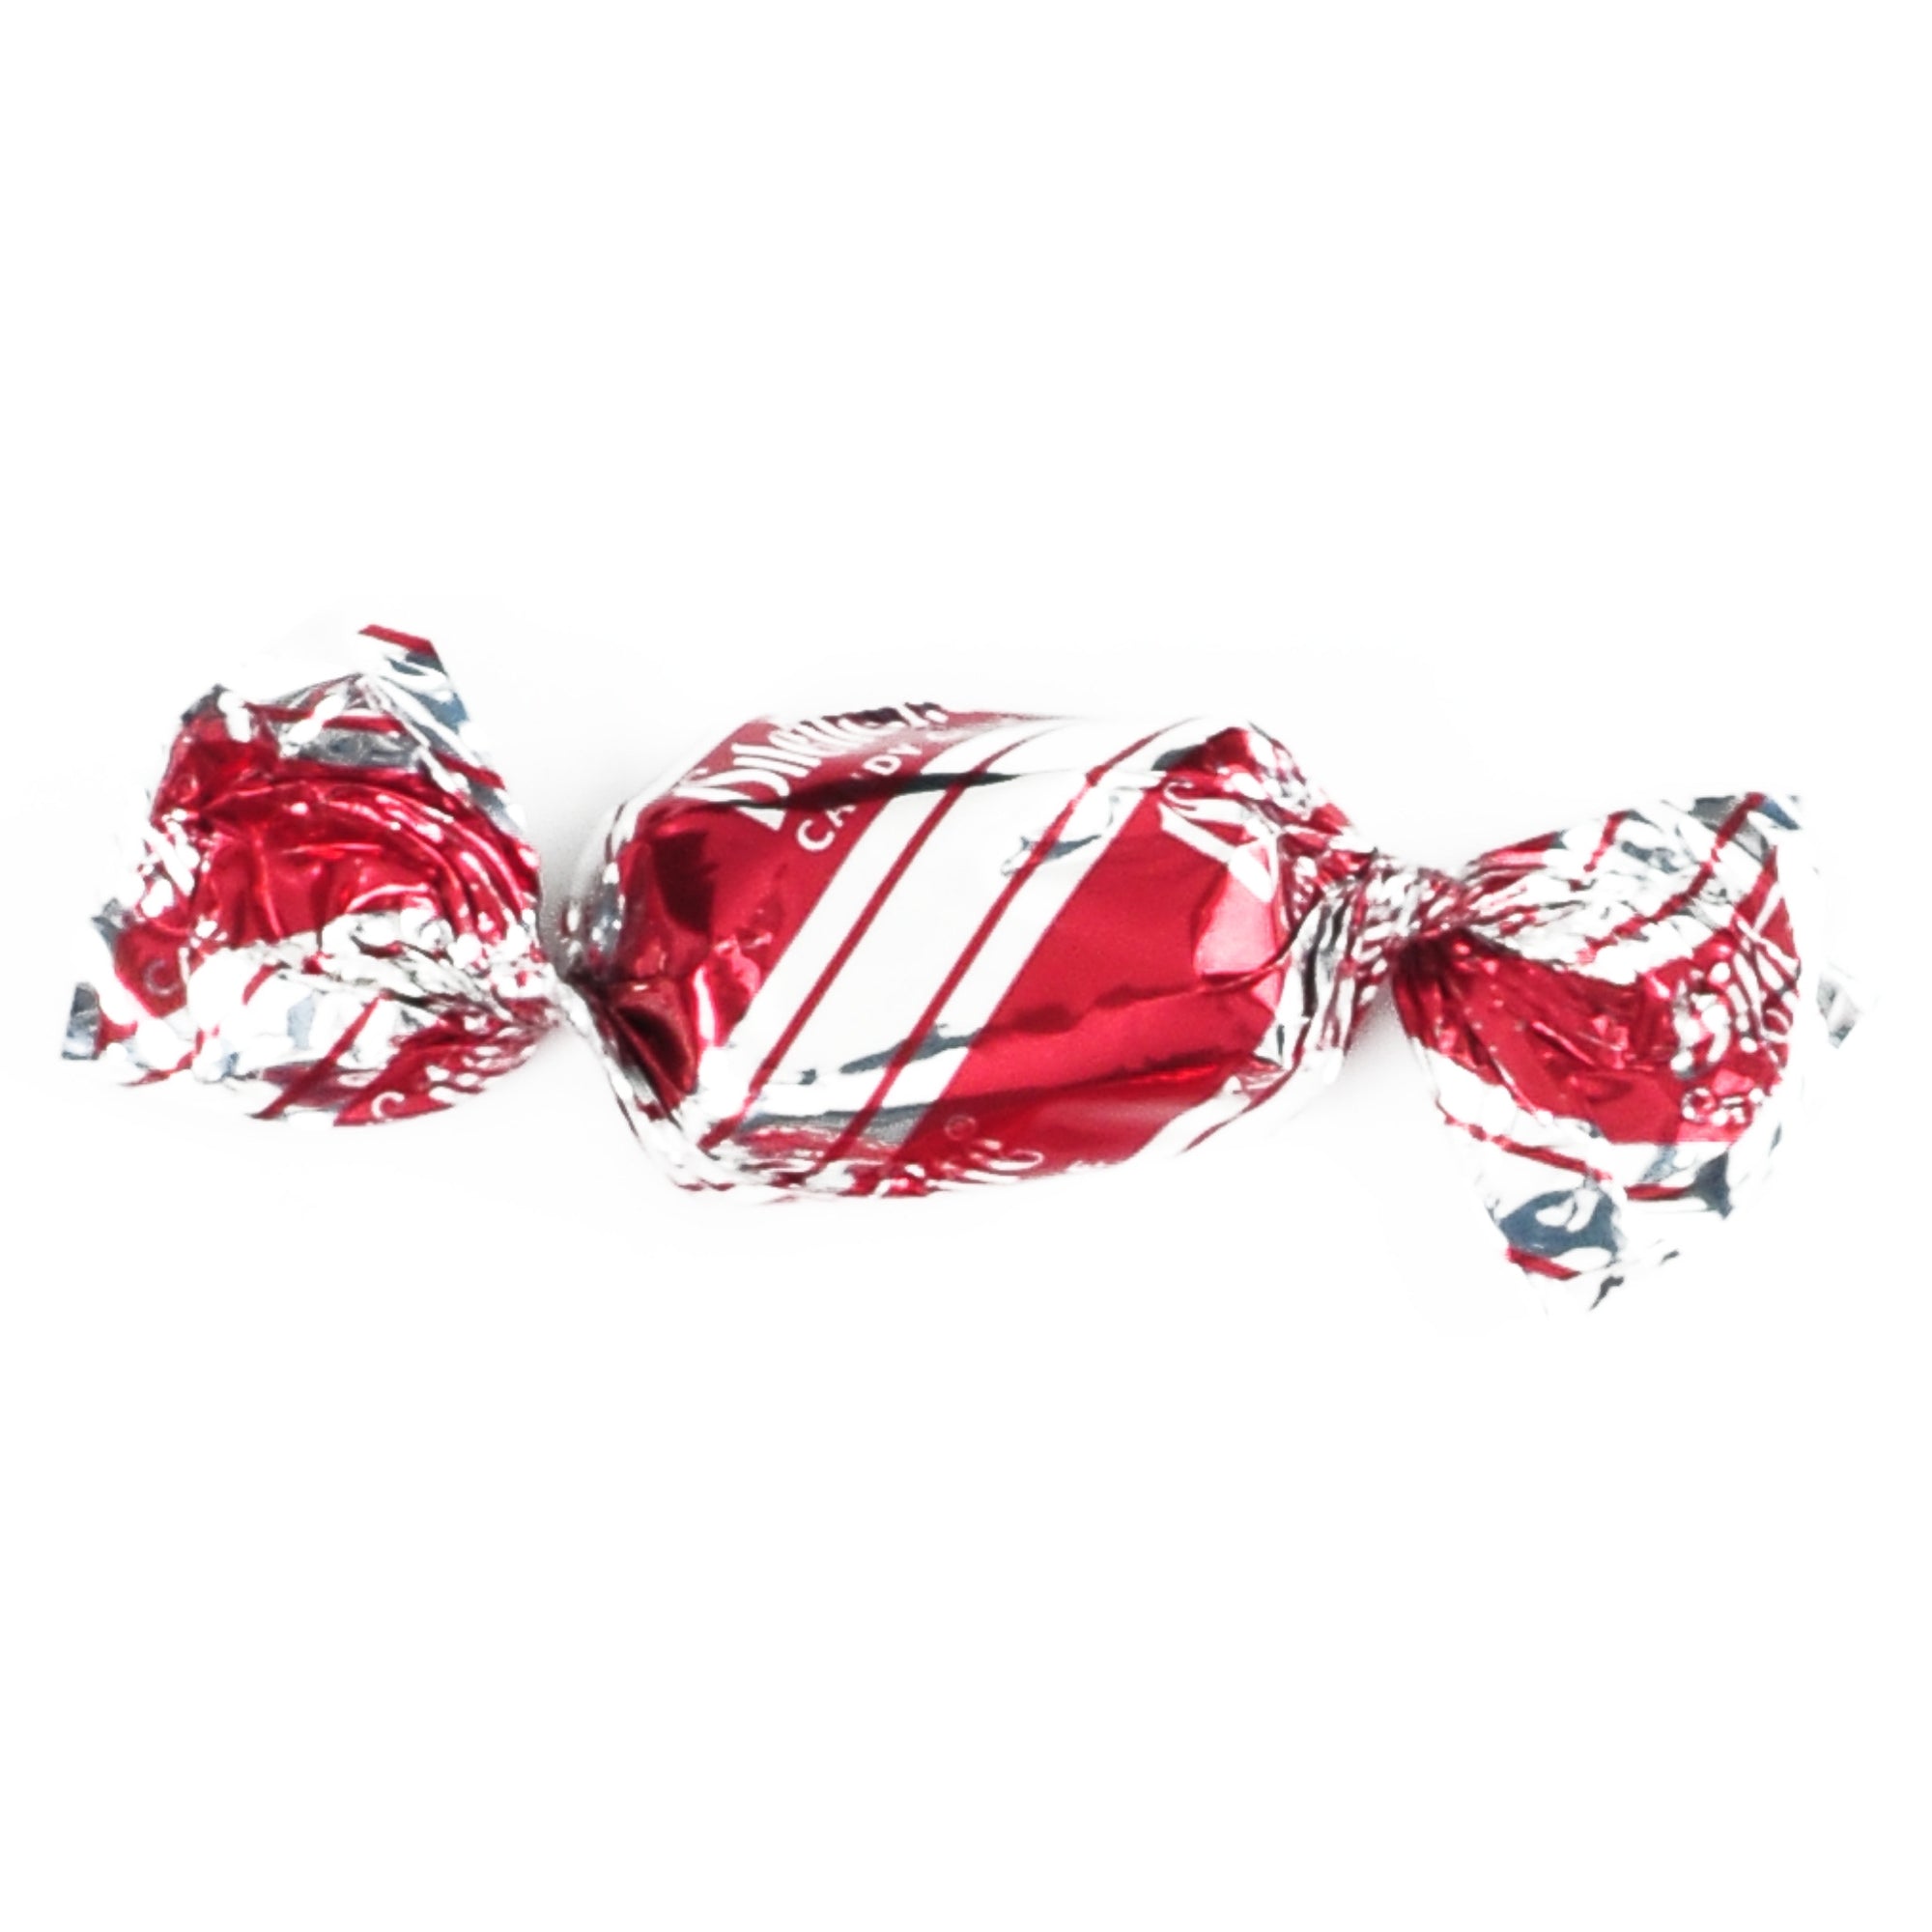 Dilettante Chocolates Candy Cane Novelty Gift Box Featuring 4-Ounces of Dilettante's Candy Cane TruffleCremes